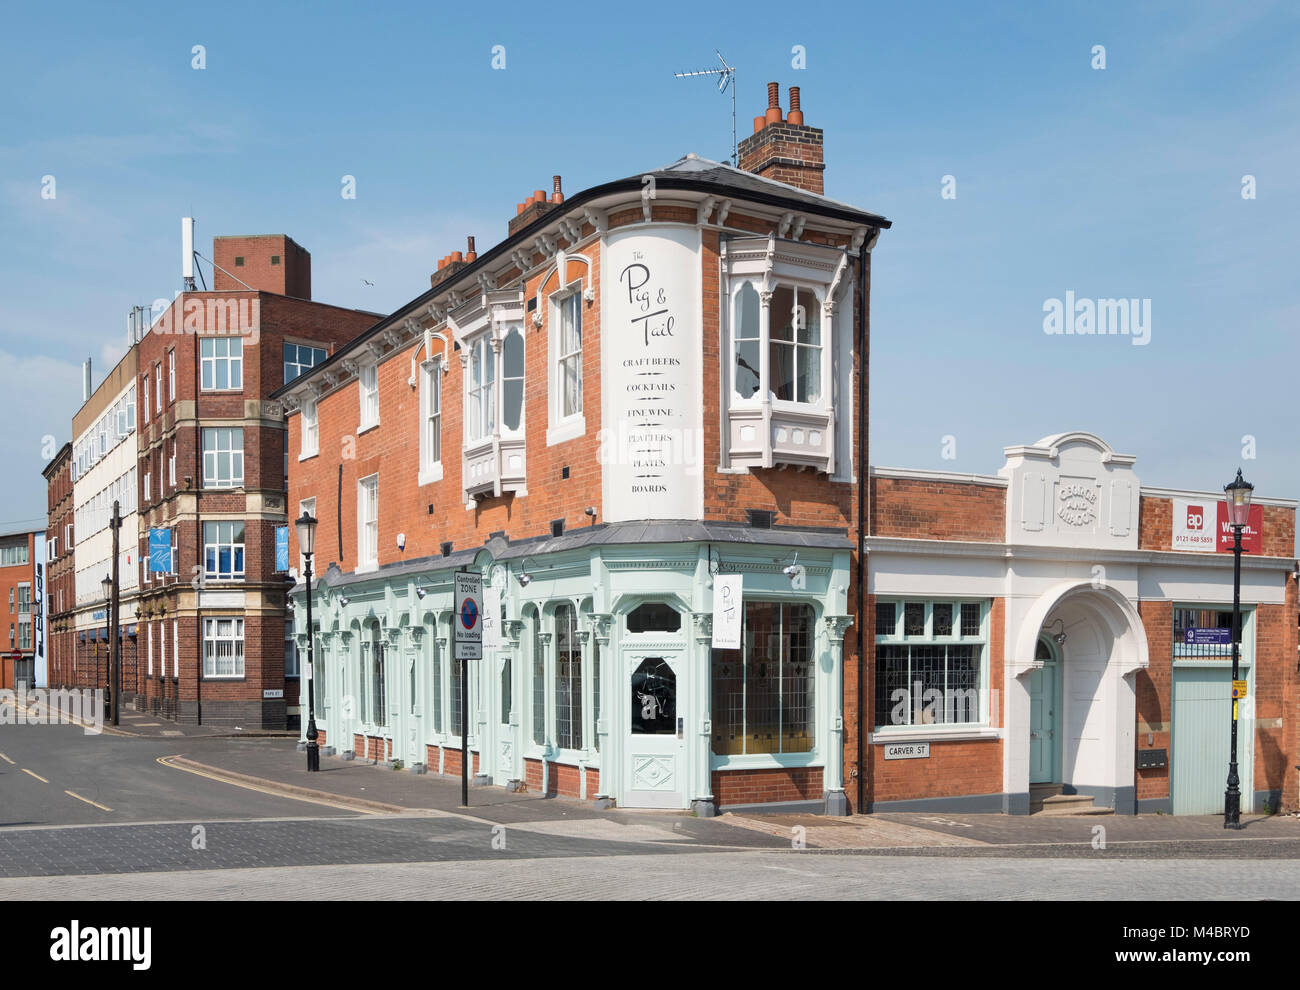 The Pig and Tail pub, The Jewellery Quarter of Birmingham, England Stock Photo